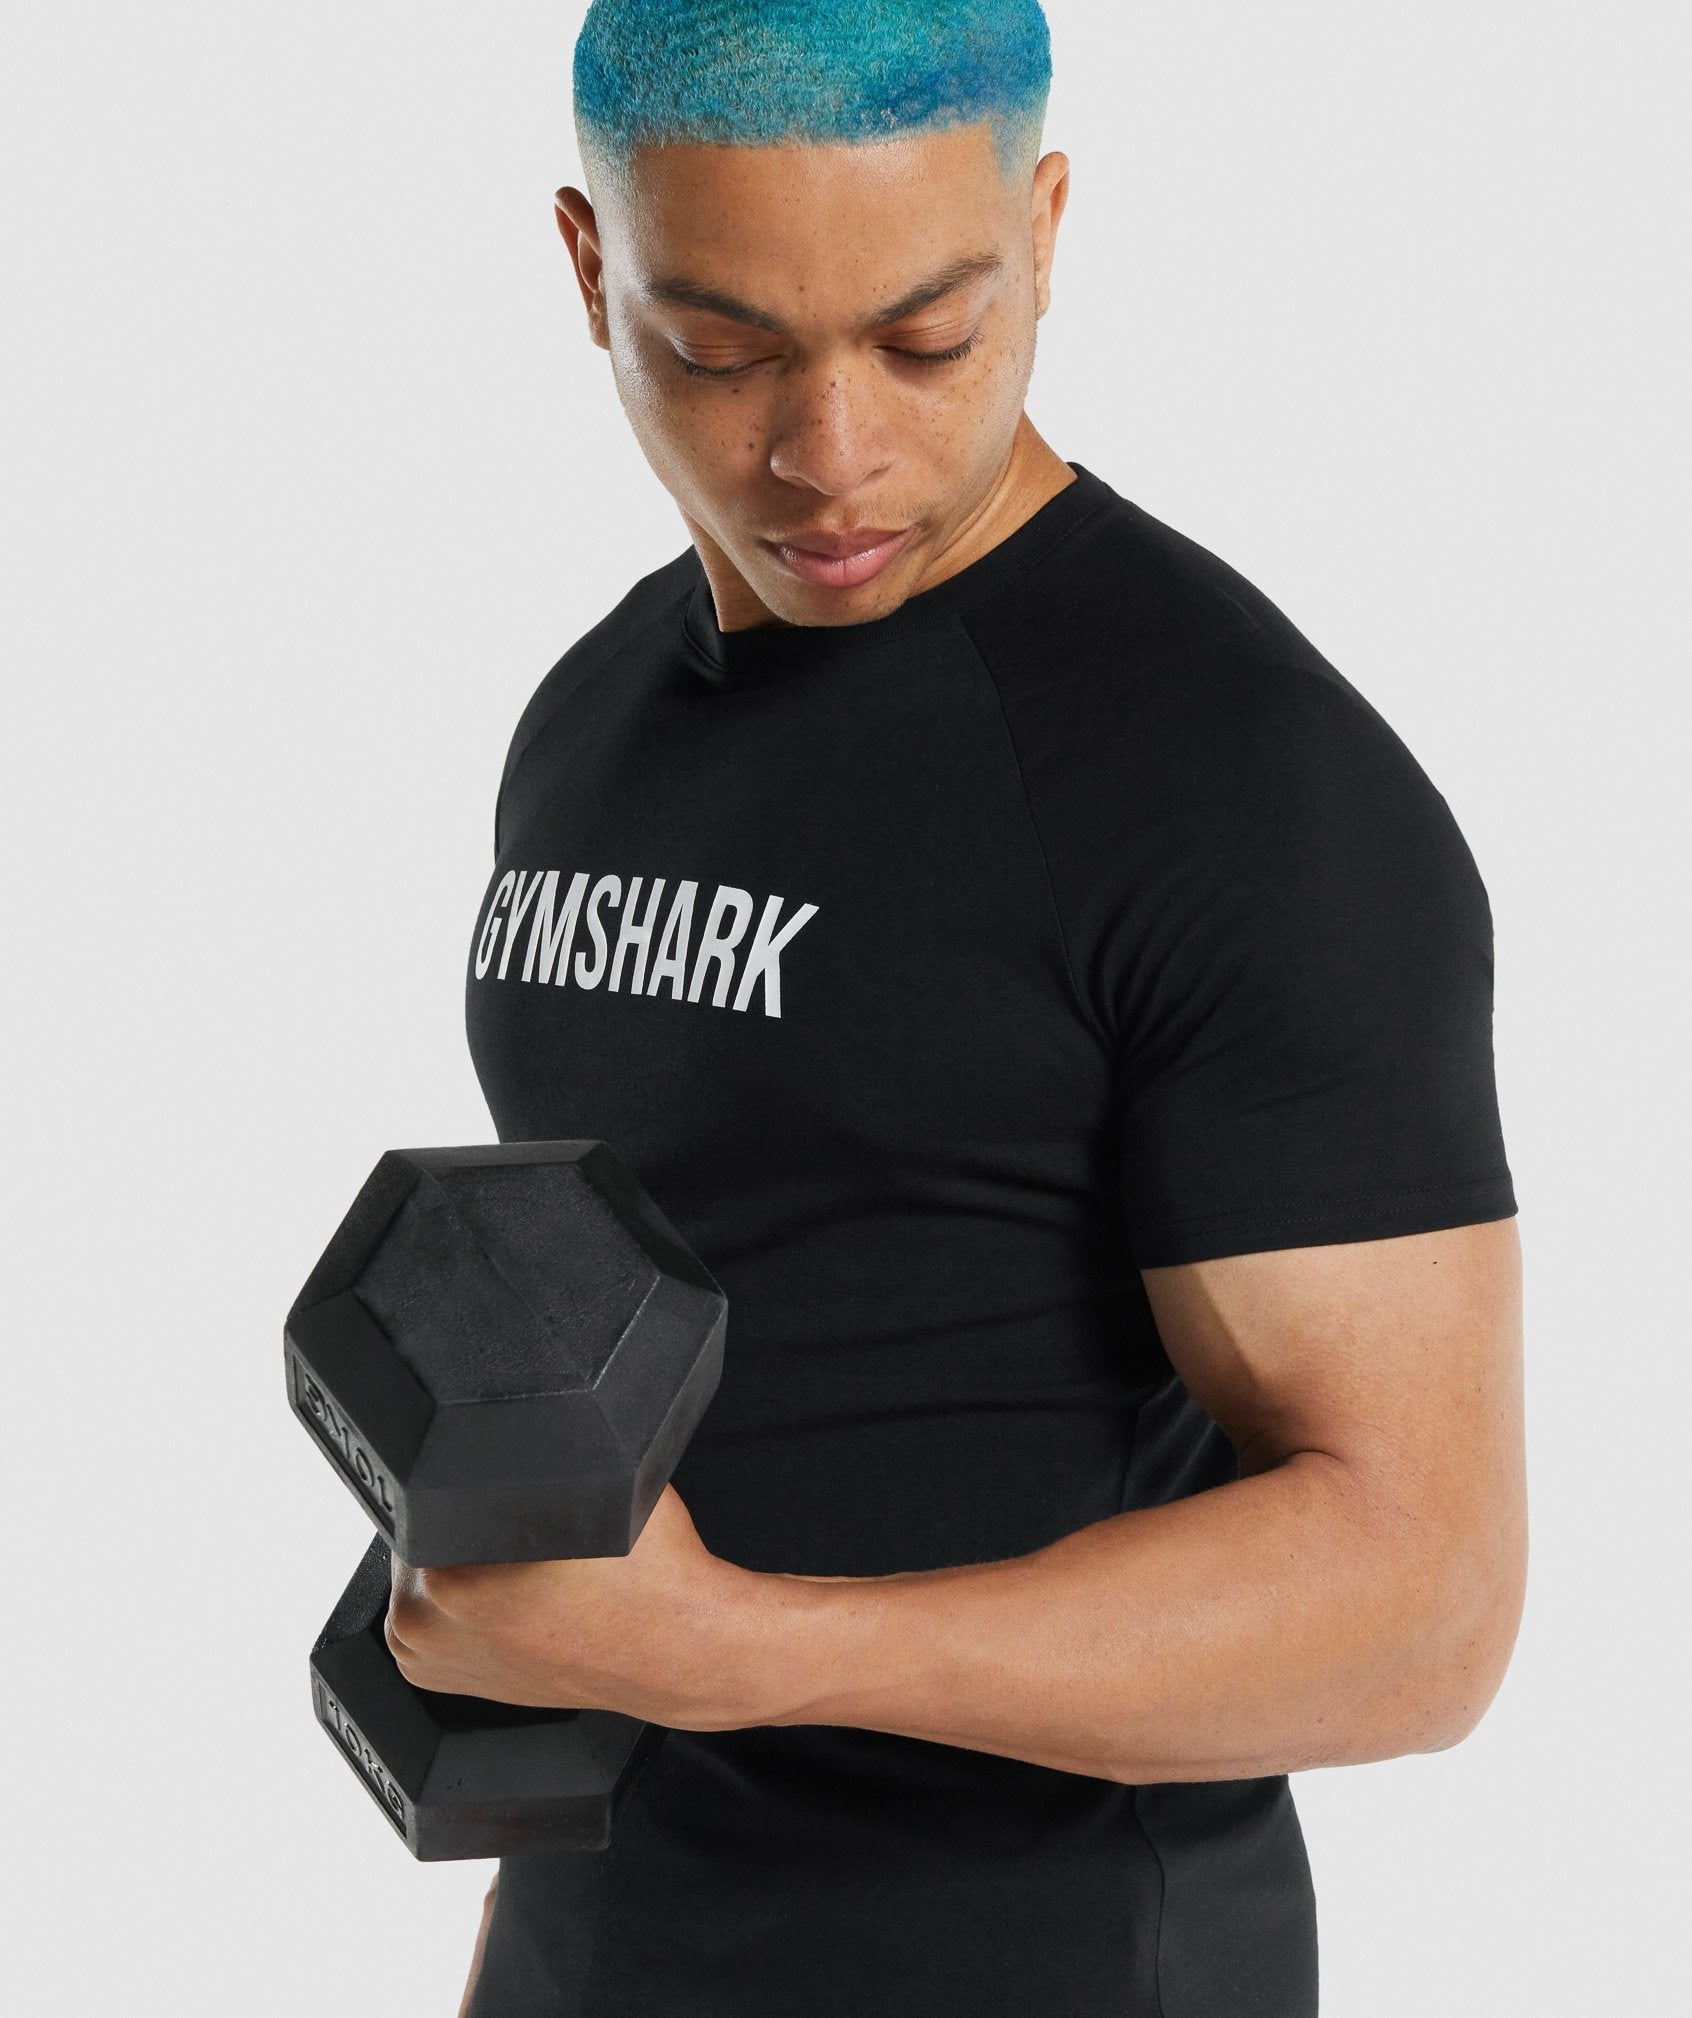 Gymshark Apollo T-shirt Review 